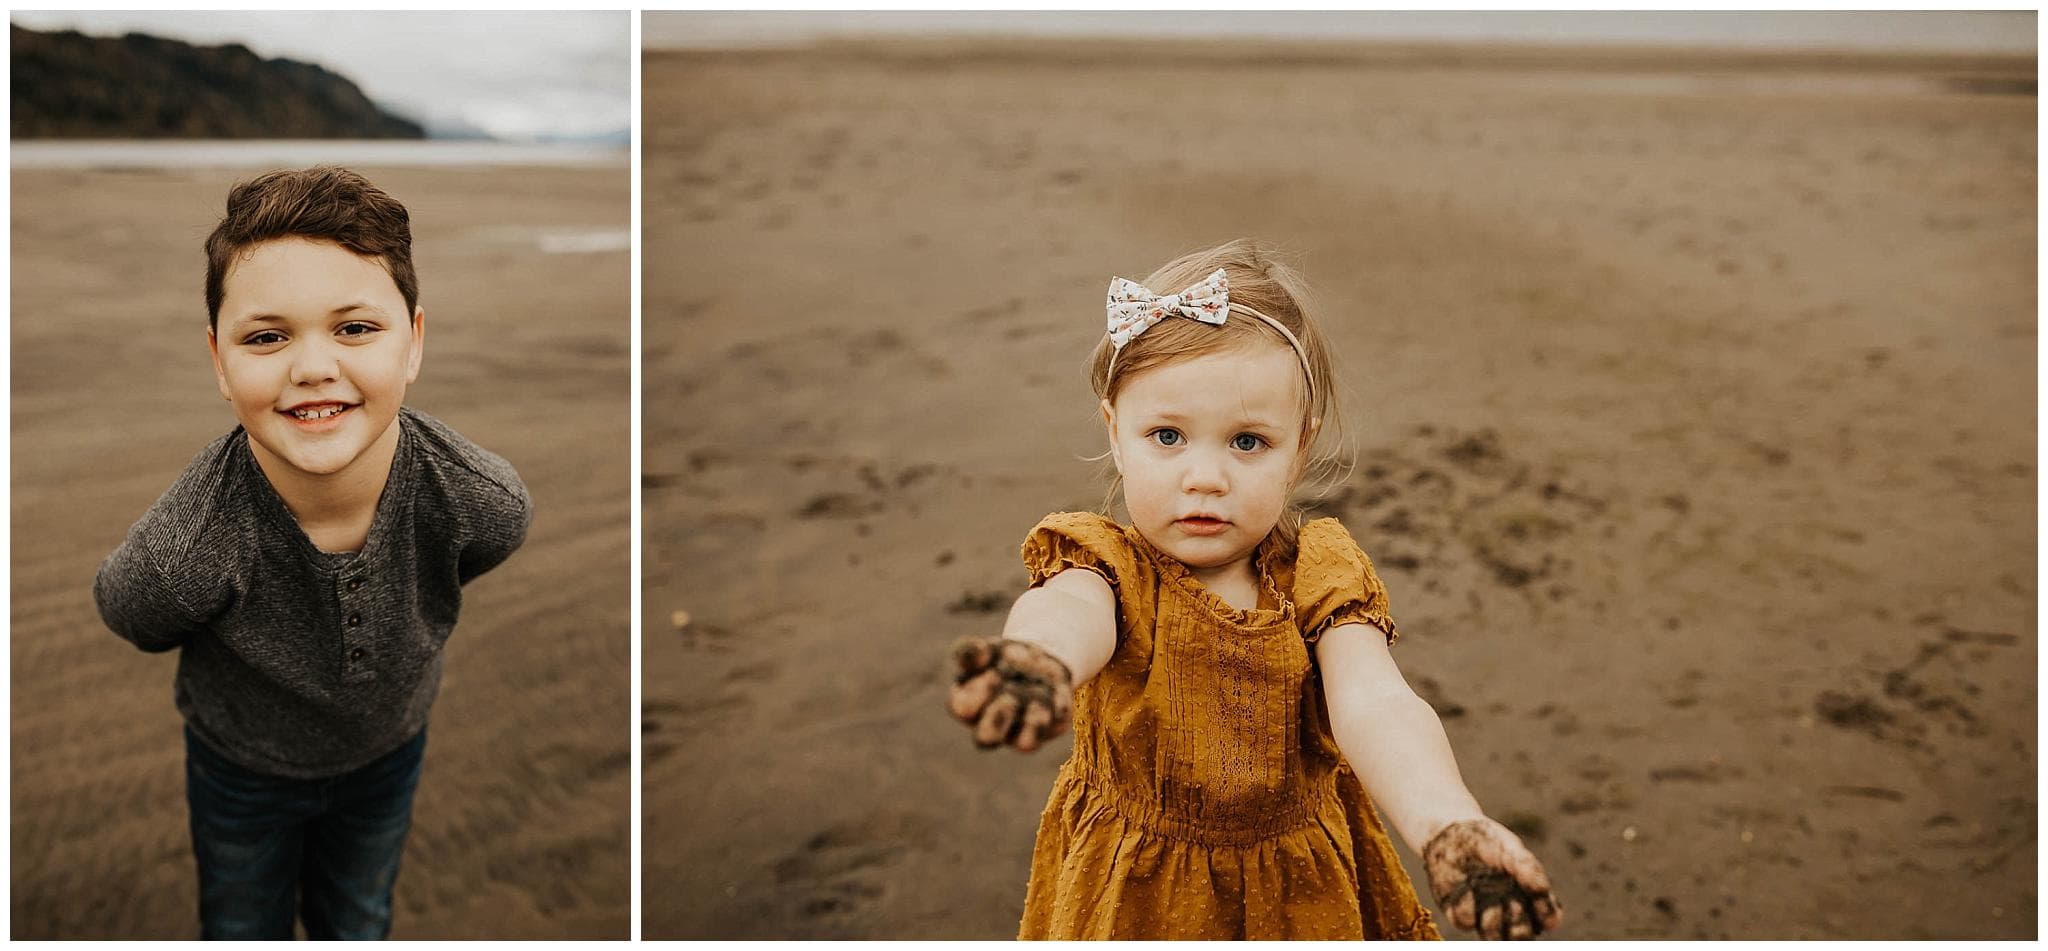 Portraits of kids on the sand in the gorge near Portland